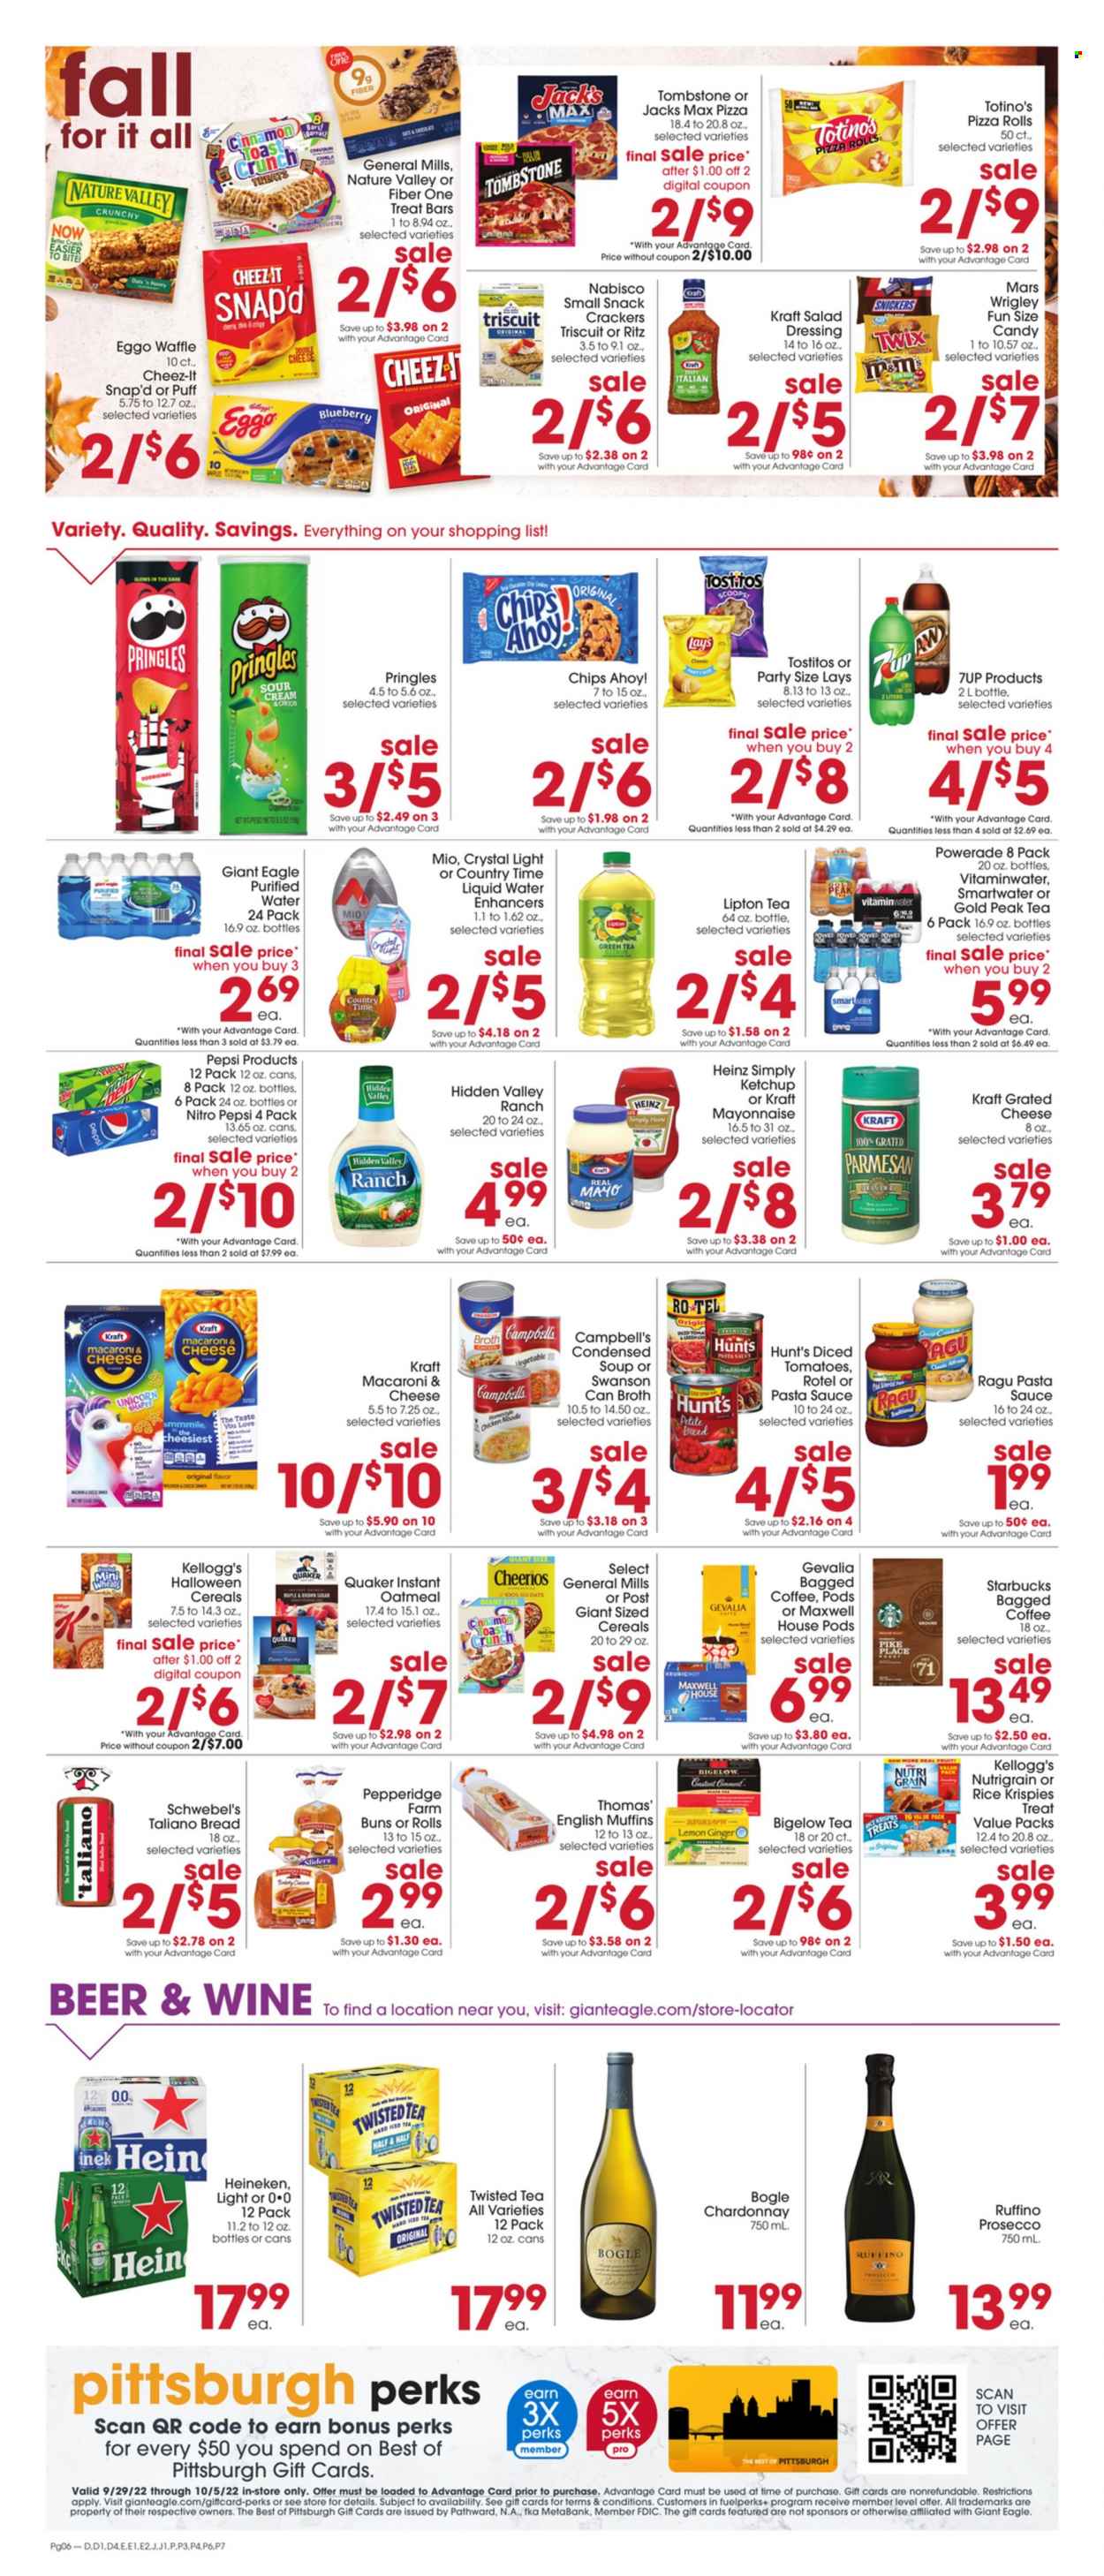 thumbnail - Giant Eagle Flyer - 09/29/2022 - 10/05/2022 - Sales products - bread, english muffins, pizza rolls, buns, ginger, Campbell's, macaroni & cheese, pizza, pasta sauce, condensed soup, soup, sauce, Quaker, instant soup, Kraft®, ragú pasta, parmesan, grated cheese, mayonnaise, snack, Snickers, Twix, Mars, M&M's, crackers, Kellogg's, Chips Ahoy!, RITZ, Pringles, chips, Lay’s, Cheez-It, Tostitos, oatmeal, broth, Heinz, diced tomatoes, cereals, Cheerios, Rice Krispies, Nature Valley, Fiber One, Nutri-Grain, cinnamon, salad dressing, ketchup, dressing, ragu, Powerade, Pepsi, Lipton, ice tea, 7UP, Gold Peak Tea, Smartwater, green tea, Maxwell House, Starbucks, Gevalia, bagged coffee, white wine, prosecco, Chardonnay, beer, Heineken, Twisted Tea. Page 4.